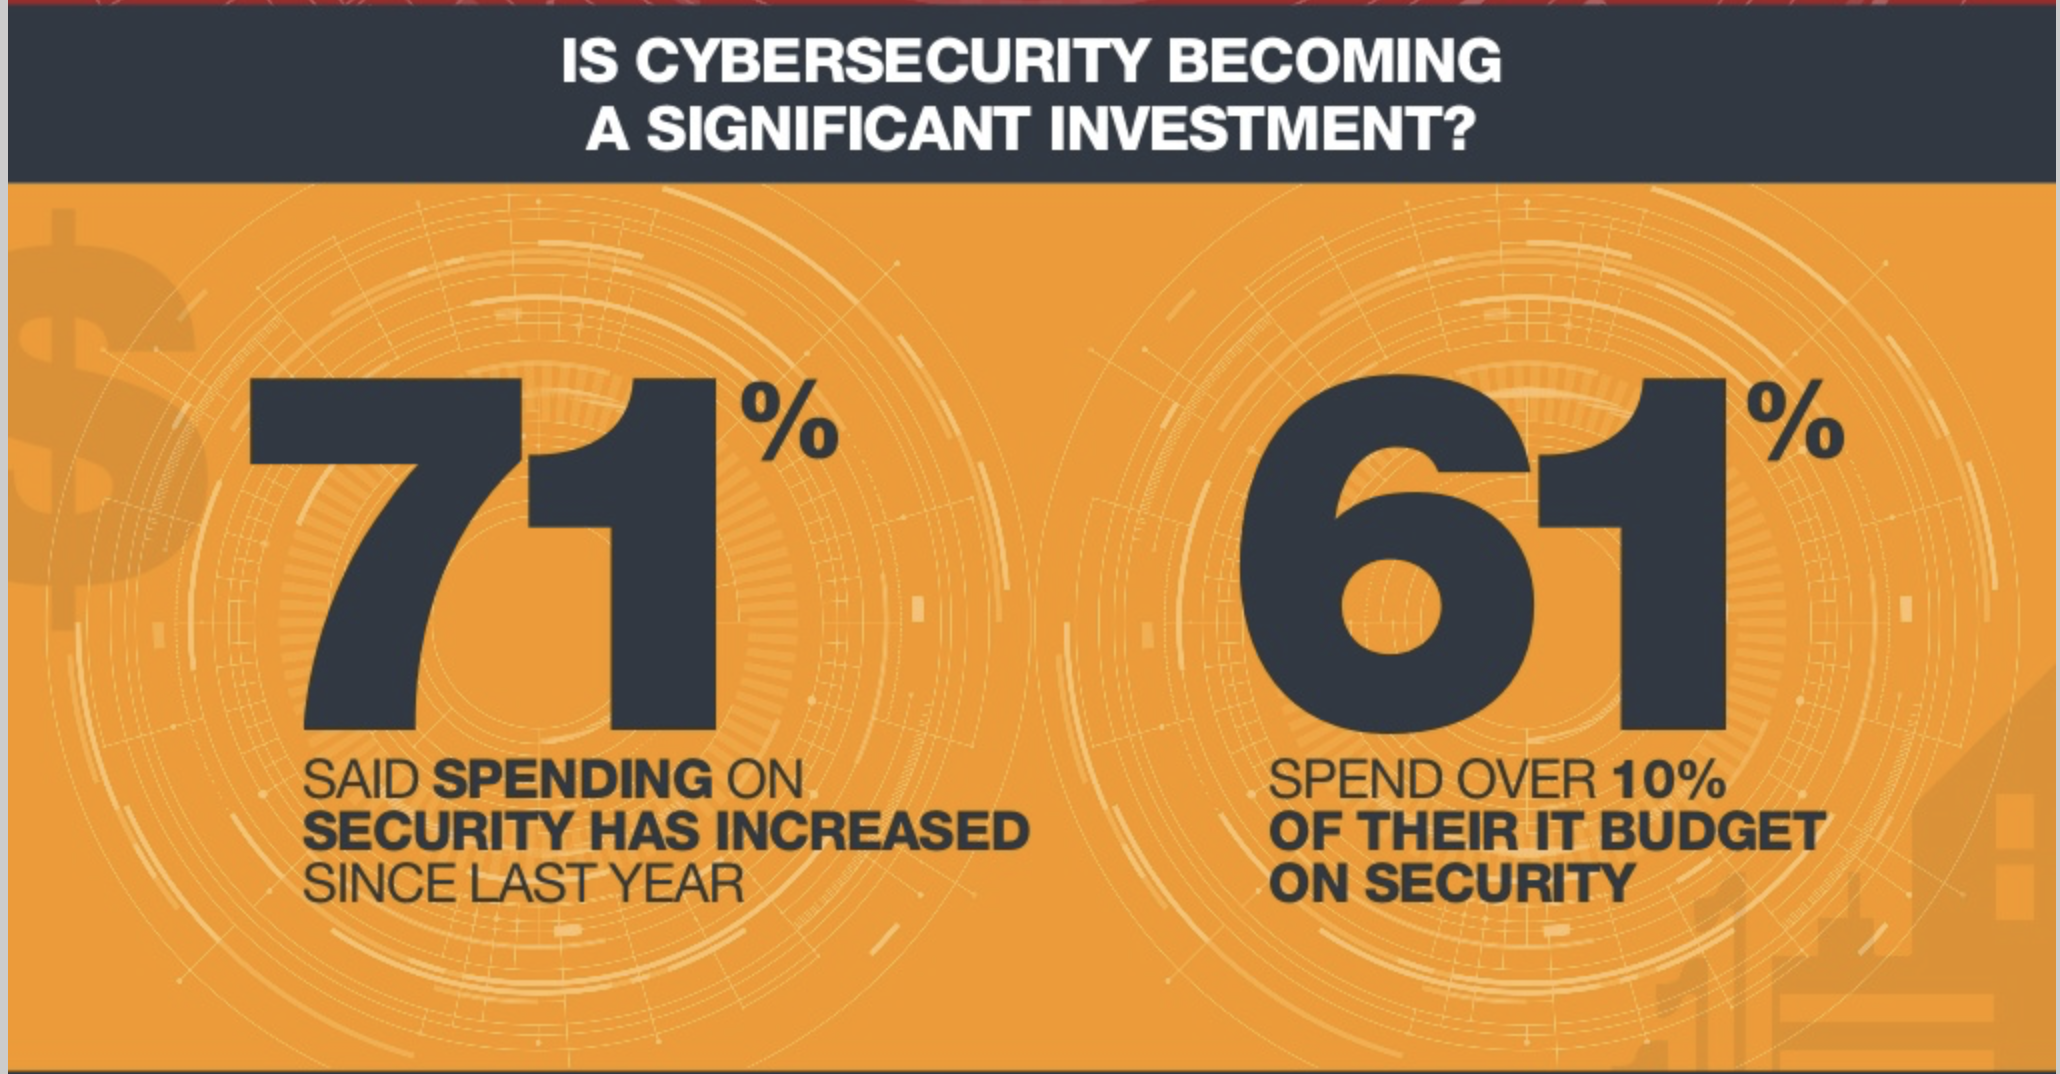 Is Cybersecurity an investment